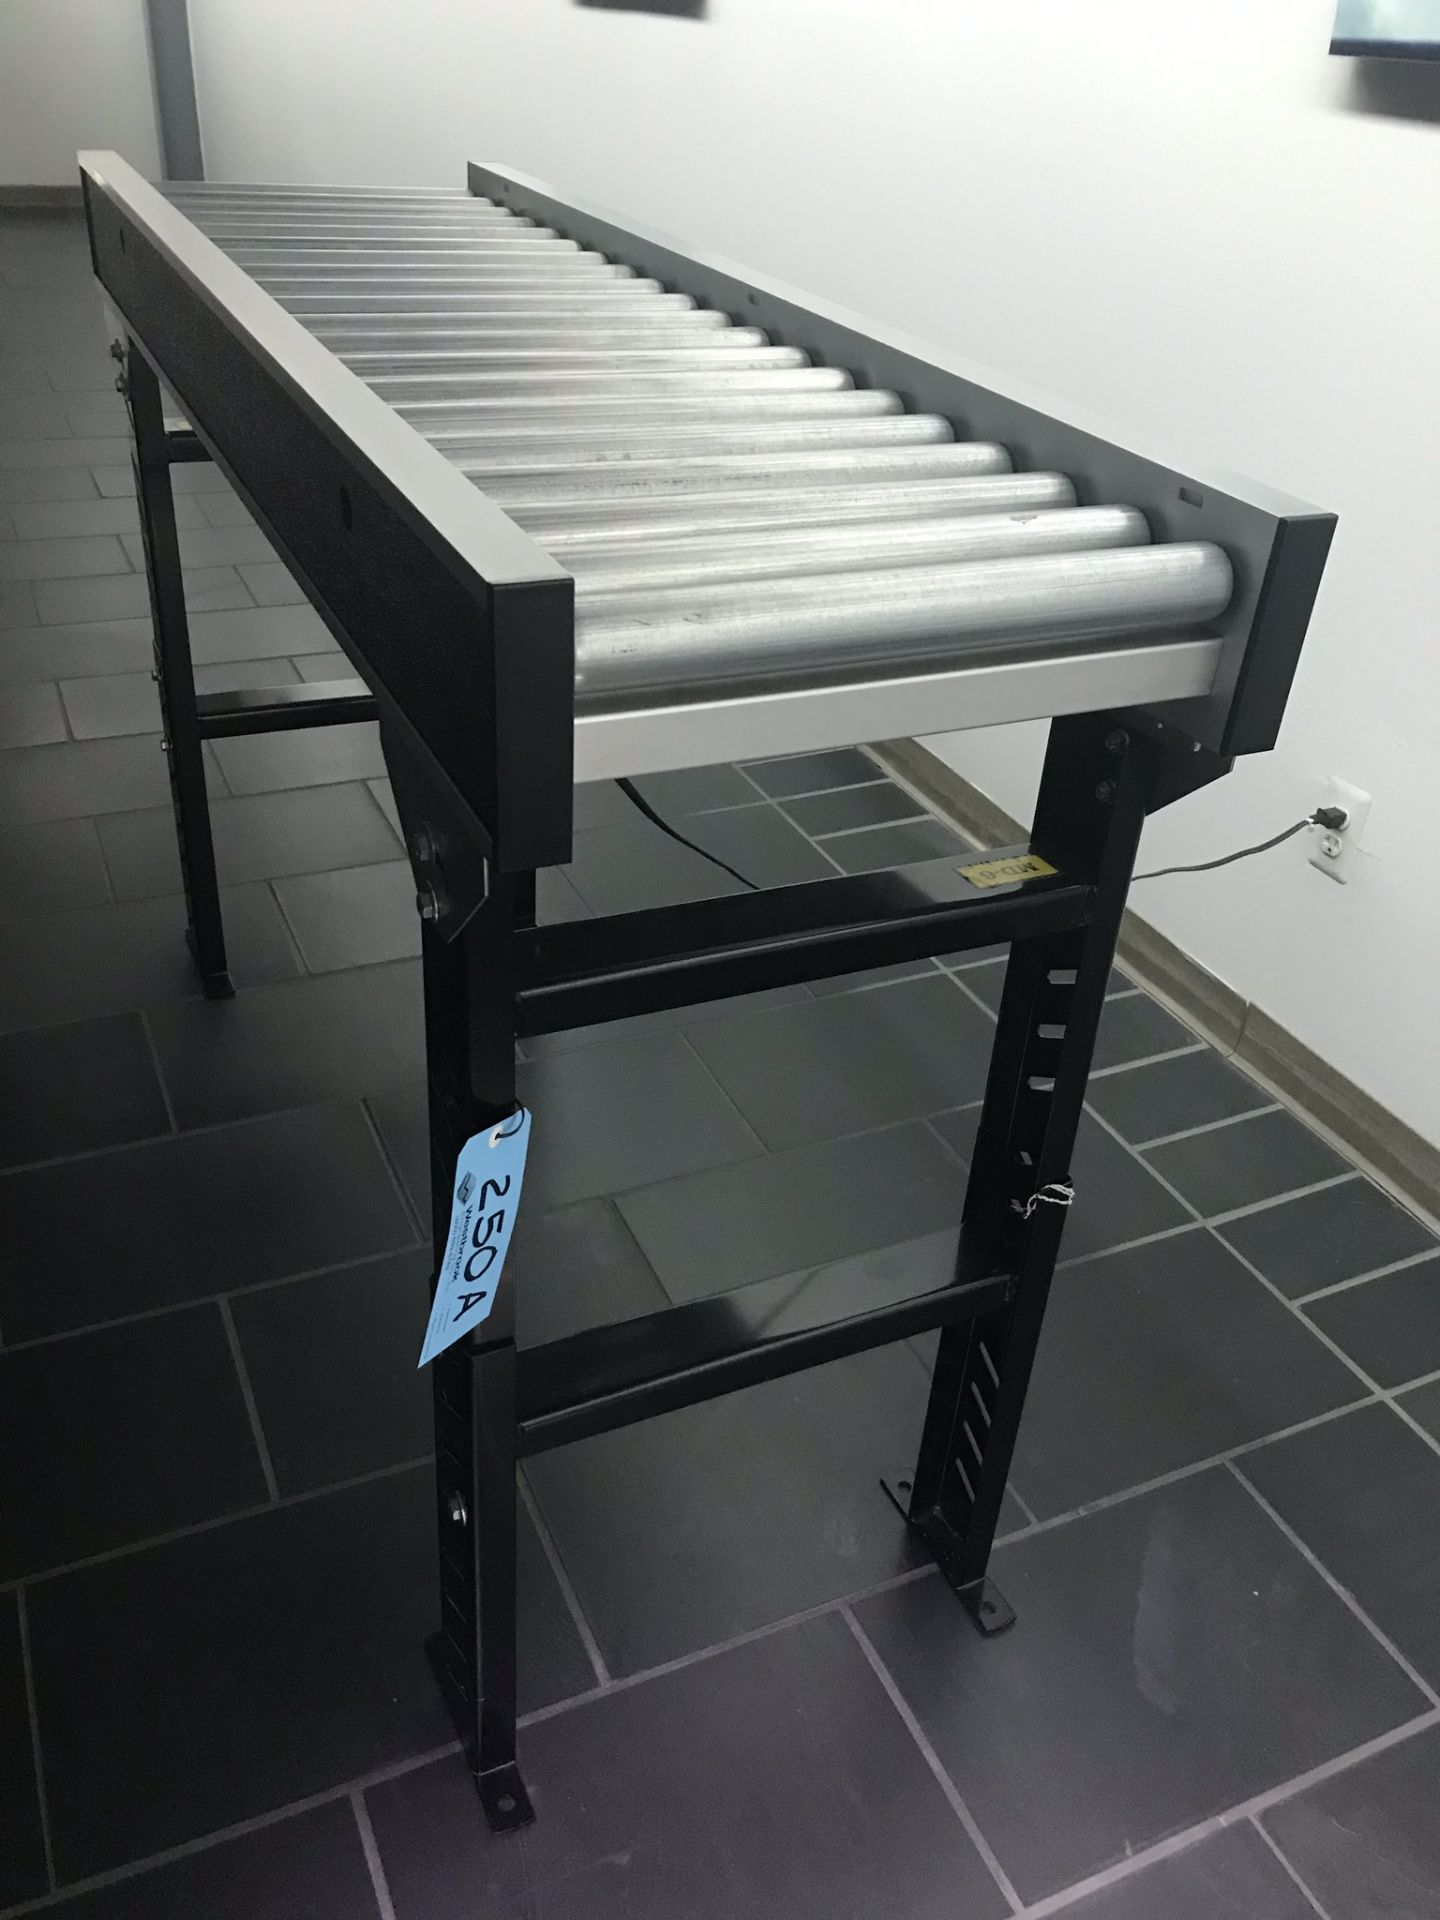 60" Long x 17" Wide, 110 Volt "Power Zone" Powered Roller Conveyor with Interroll Material Sensors - Image 2 of 2